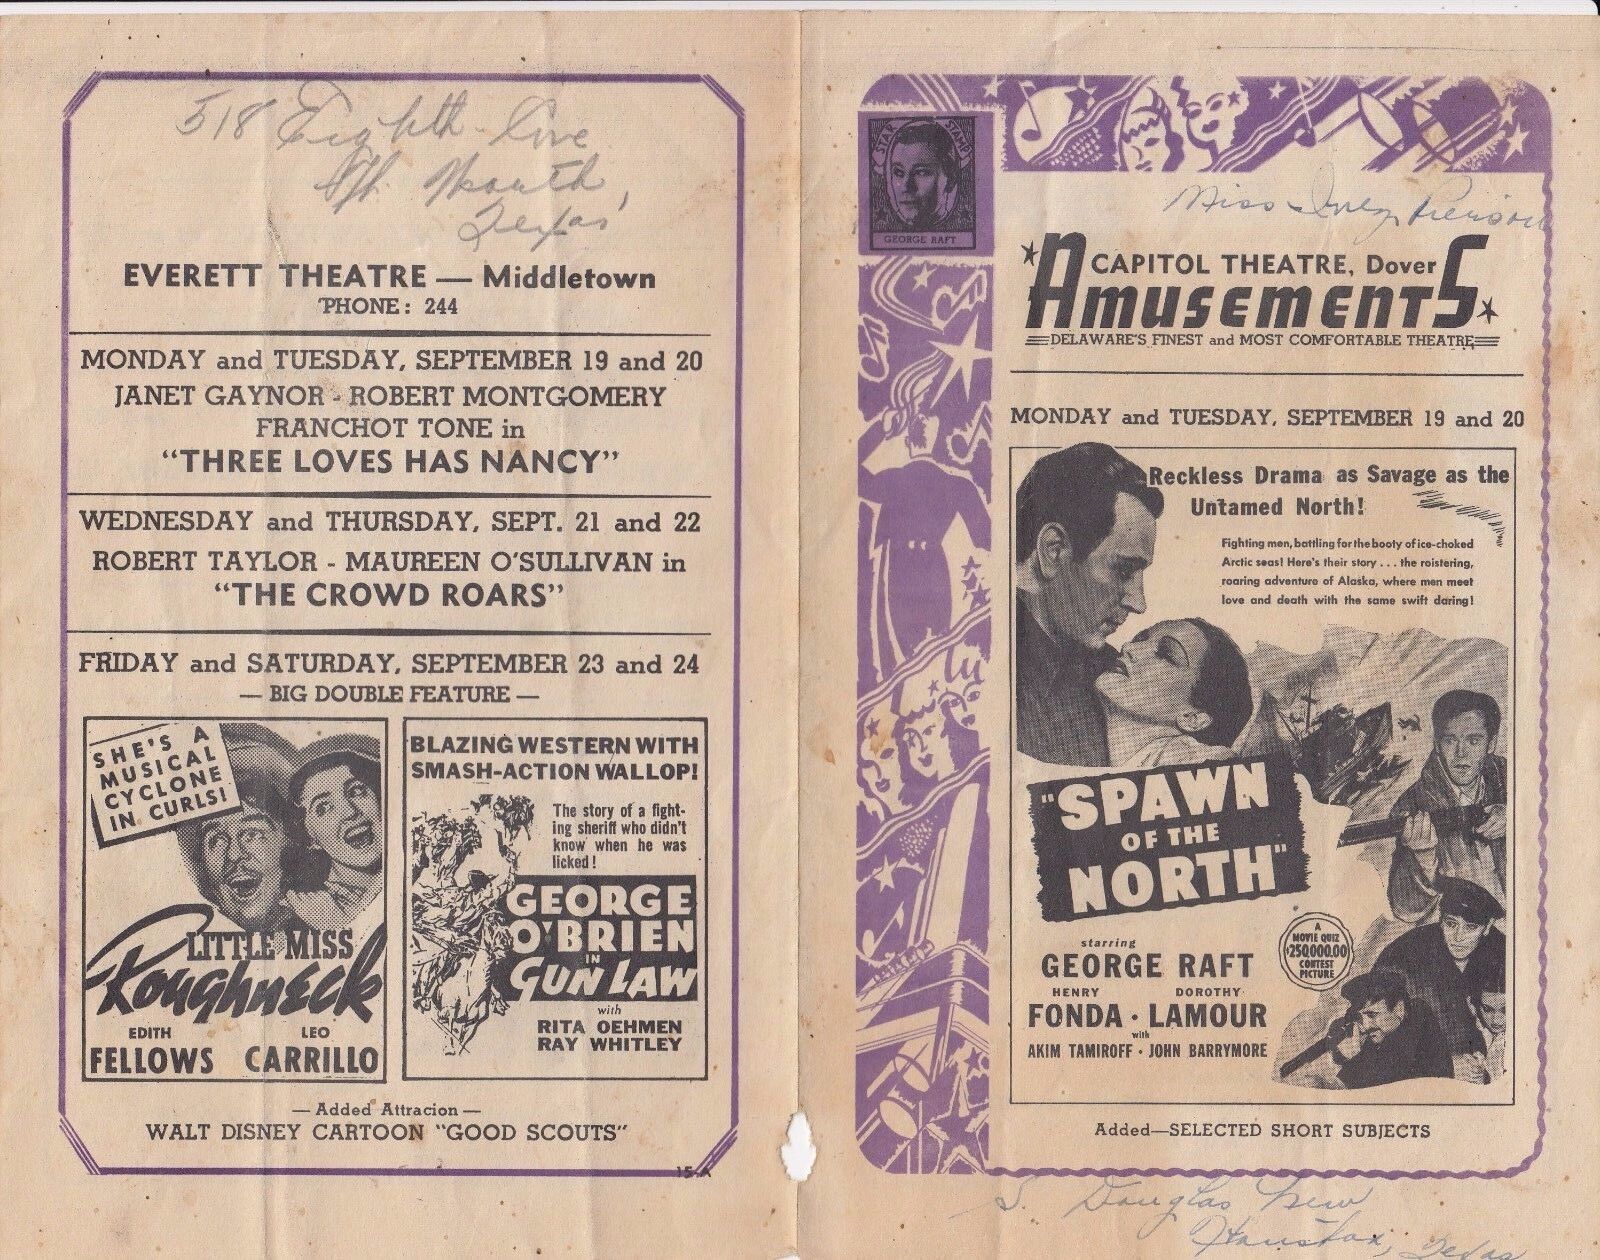 Gene Autry Ginger Rogers George Raft Fonda 1938 Ad Sheet For Delaware Theatres